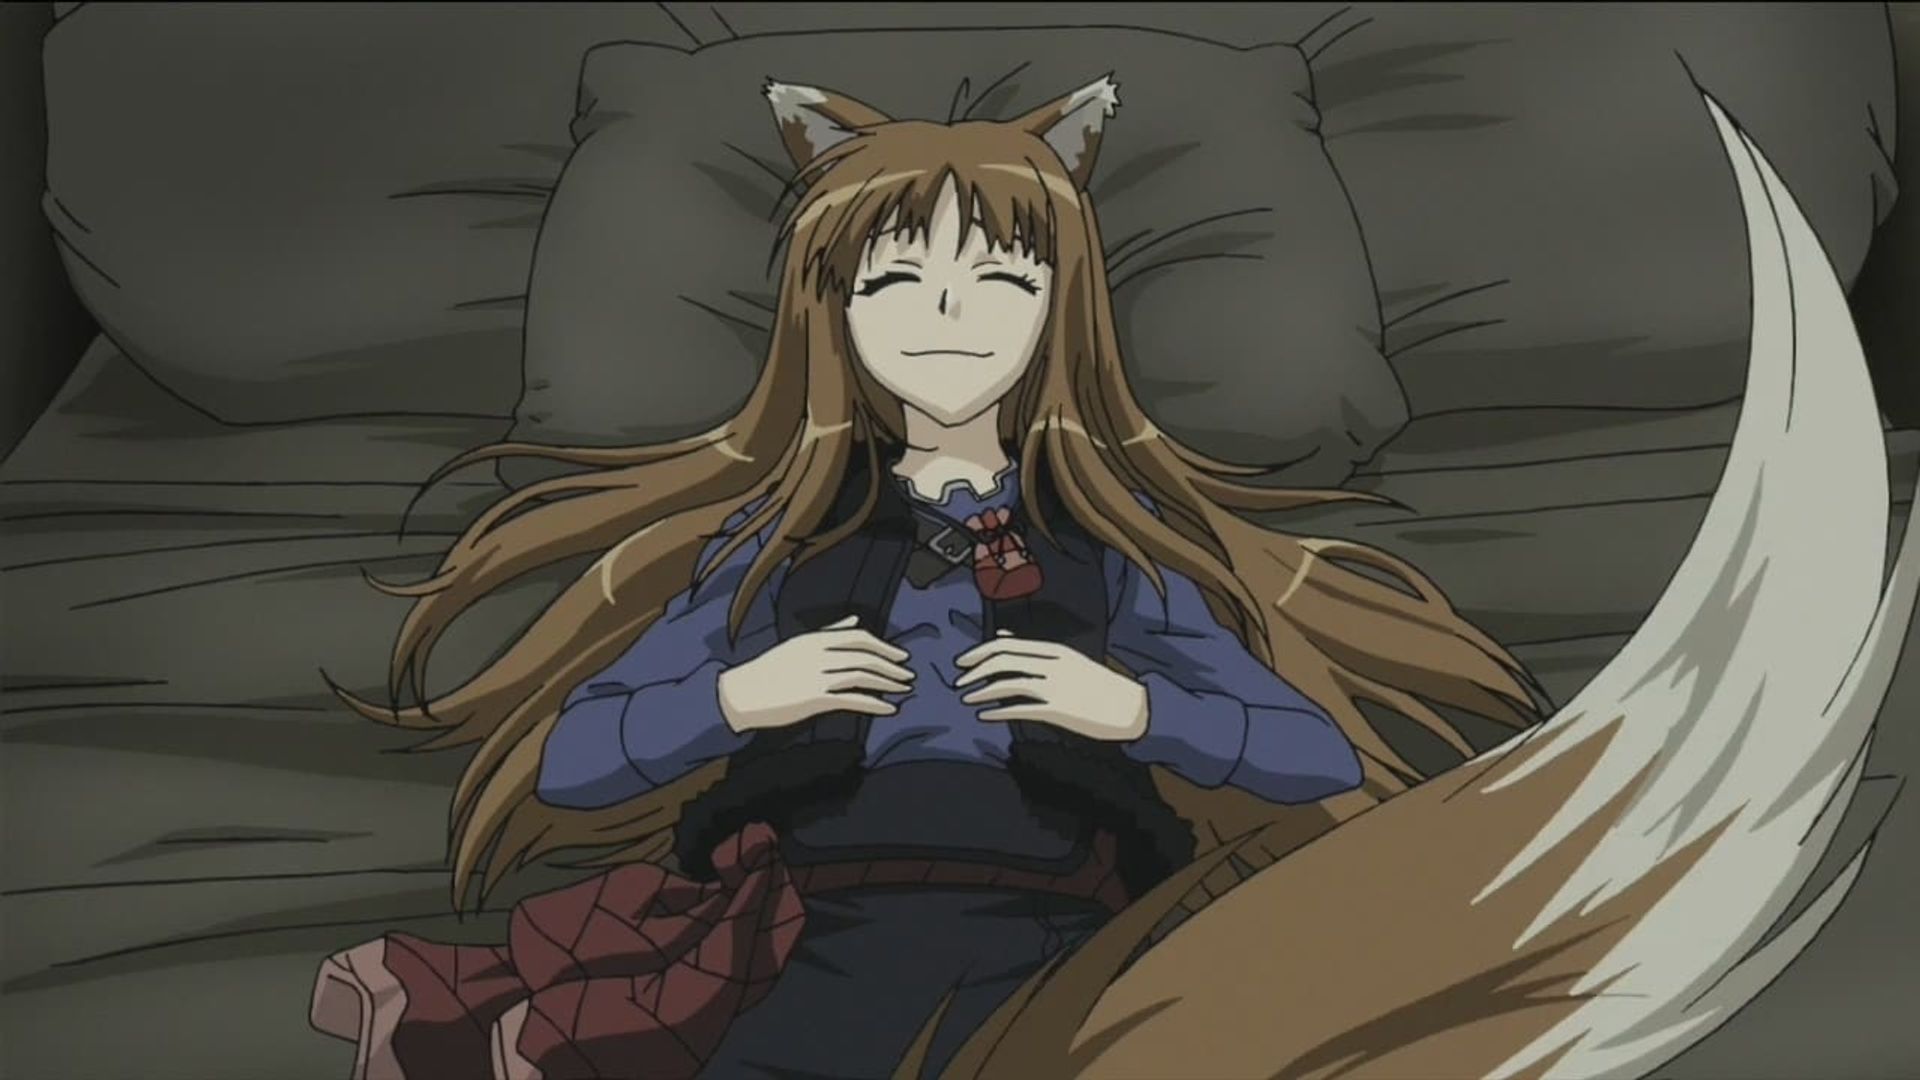 Spice and Wolf background